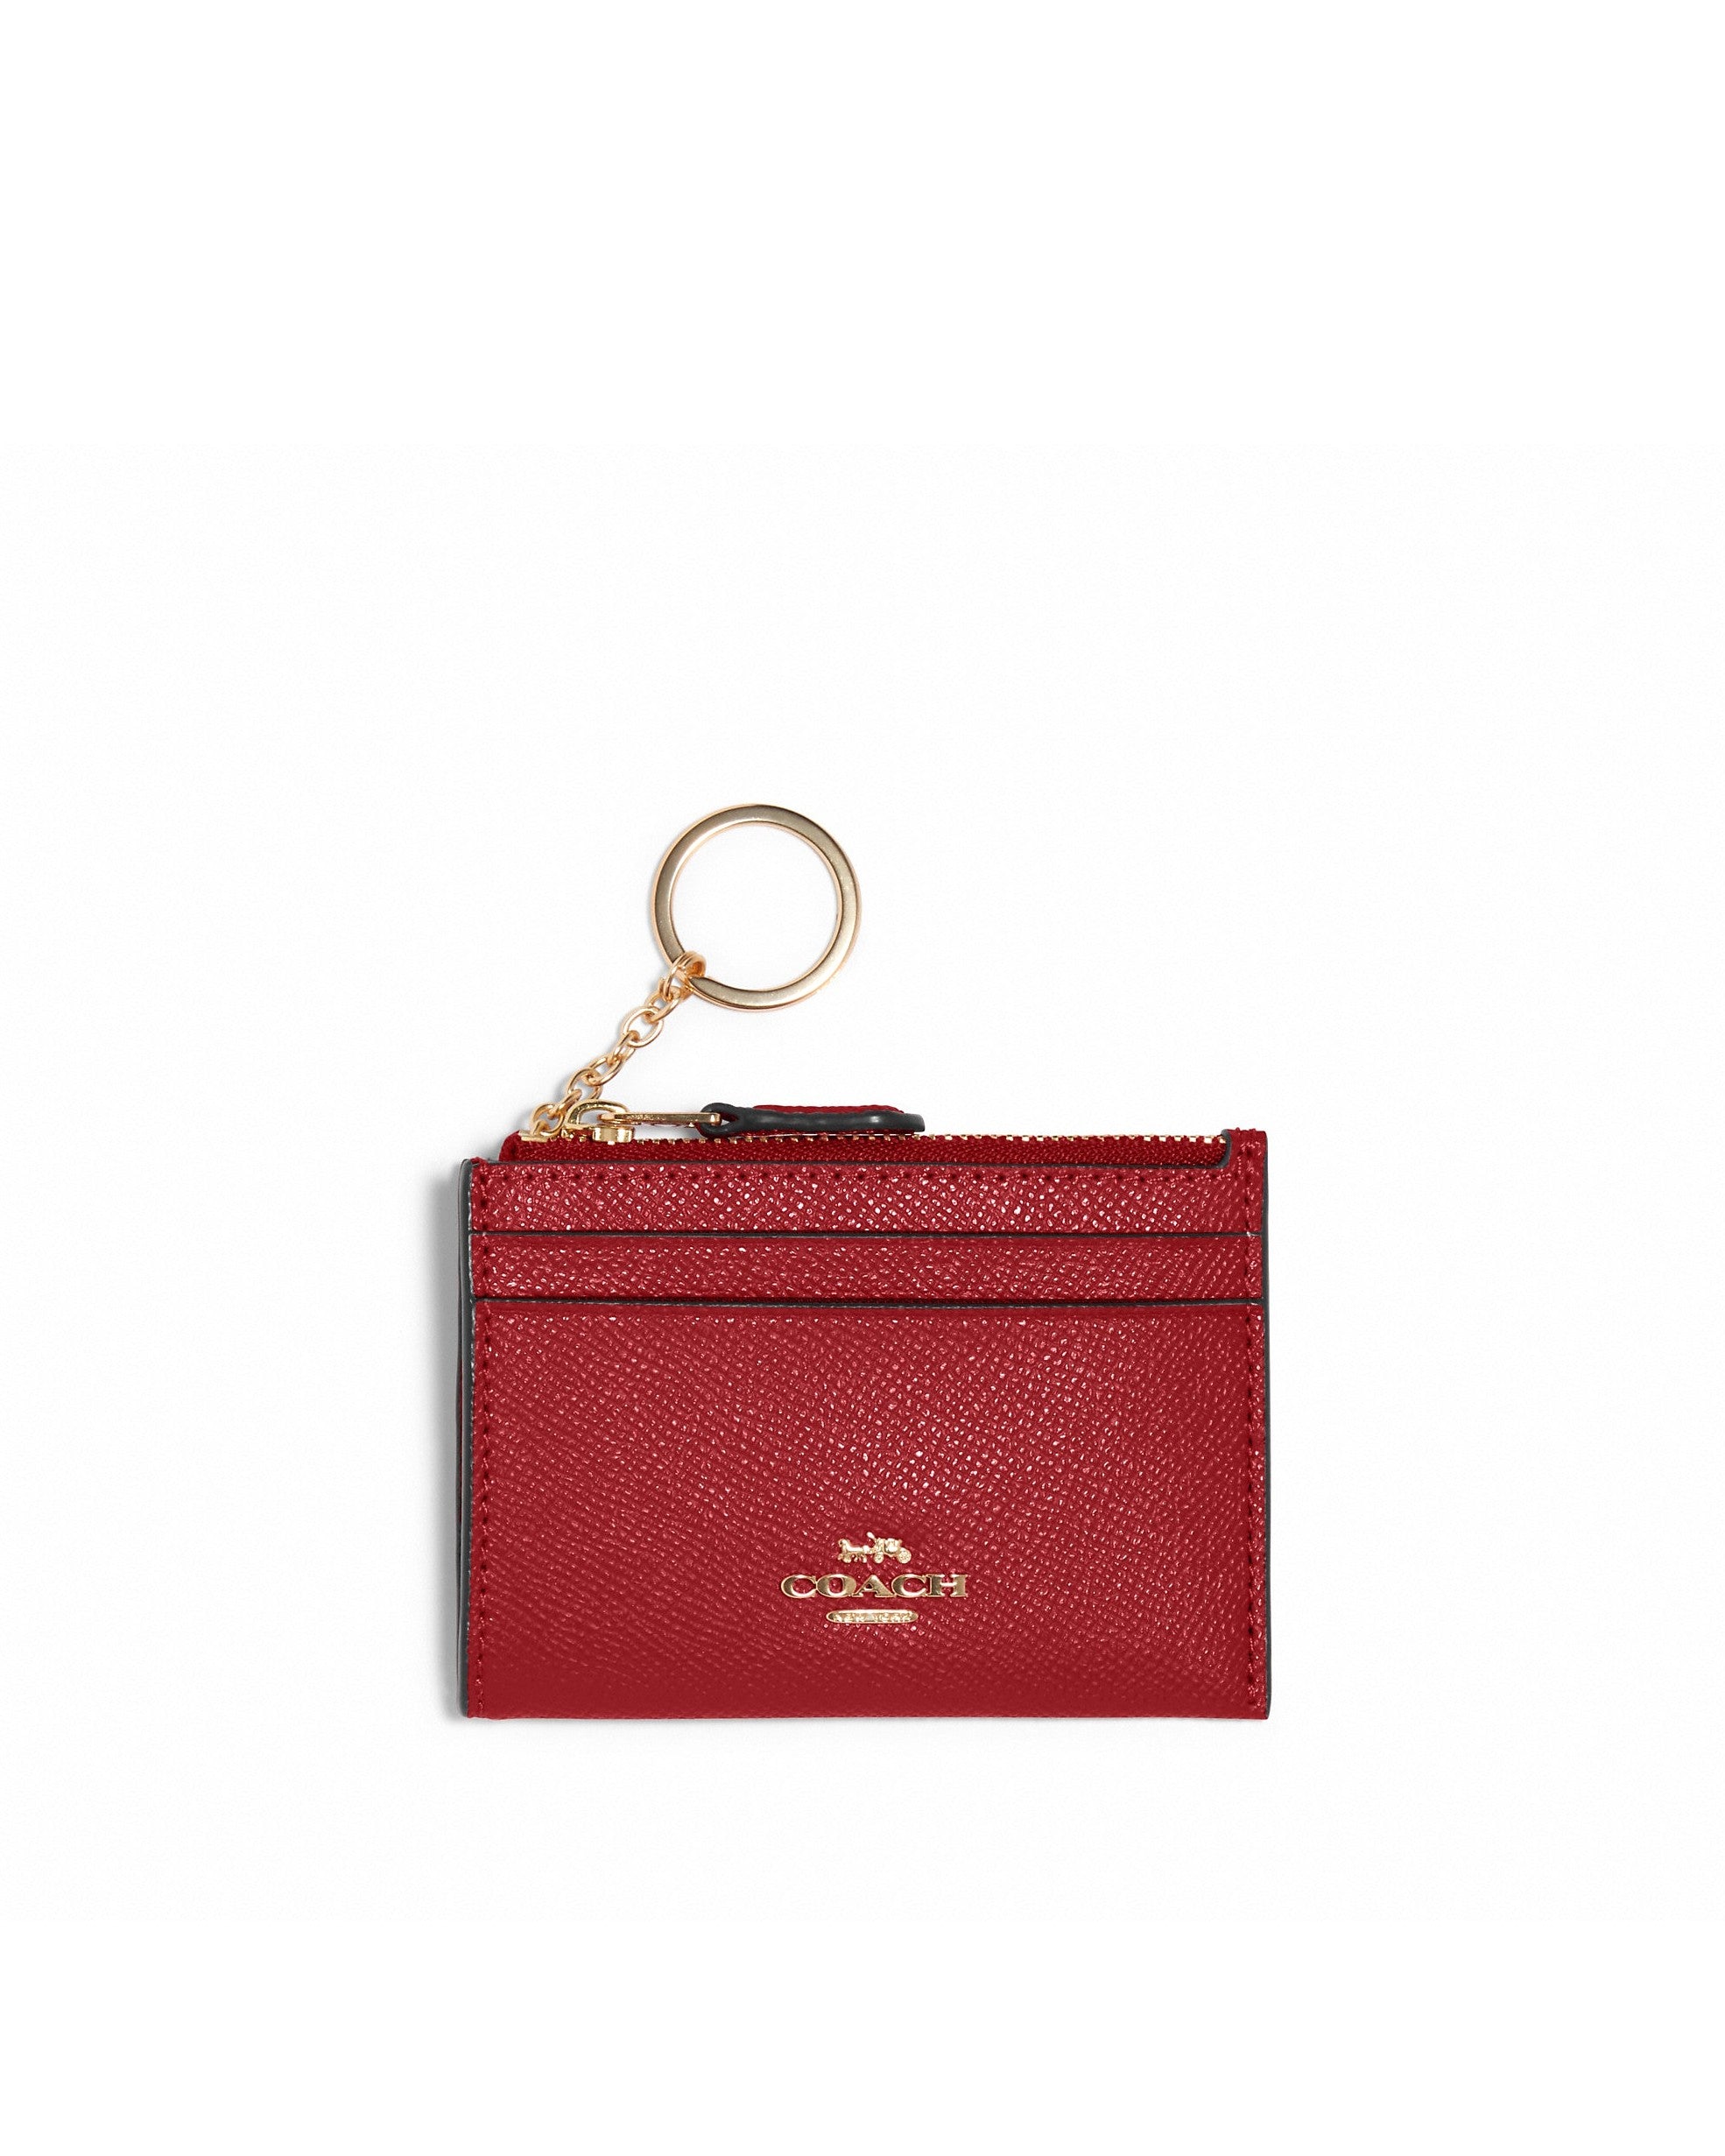 title:Coach Women's Red Mini Skinny Id Case;color:Red